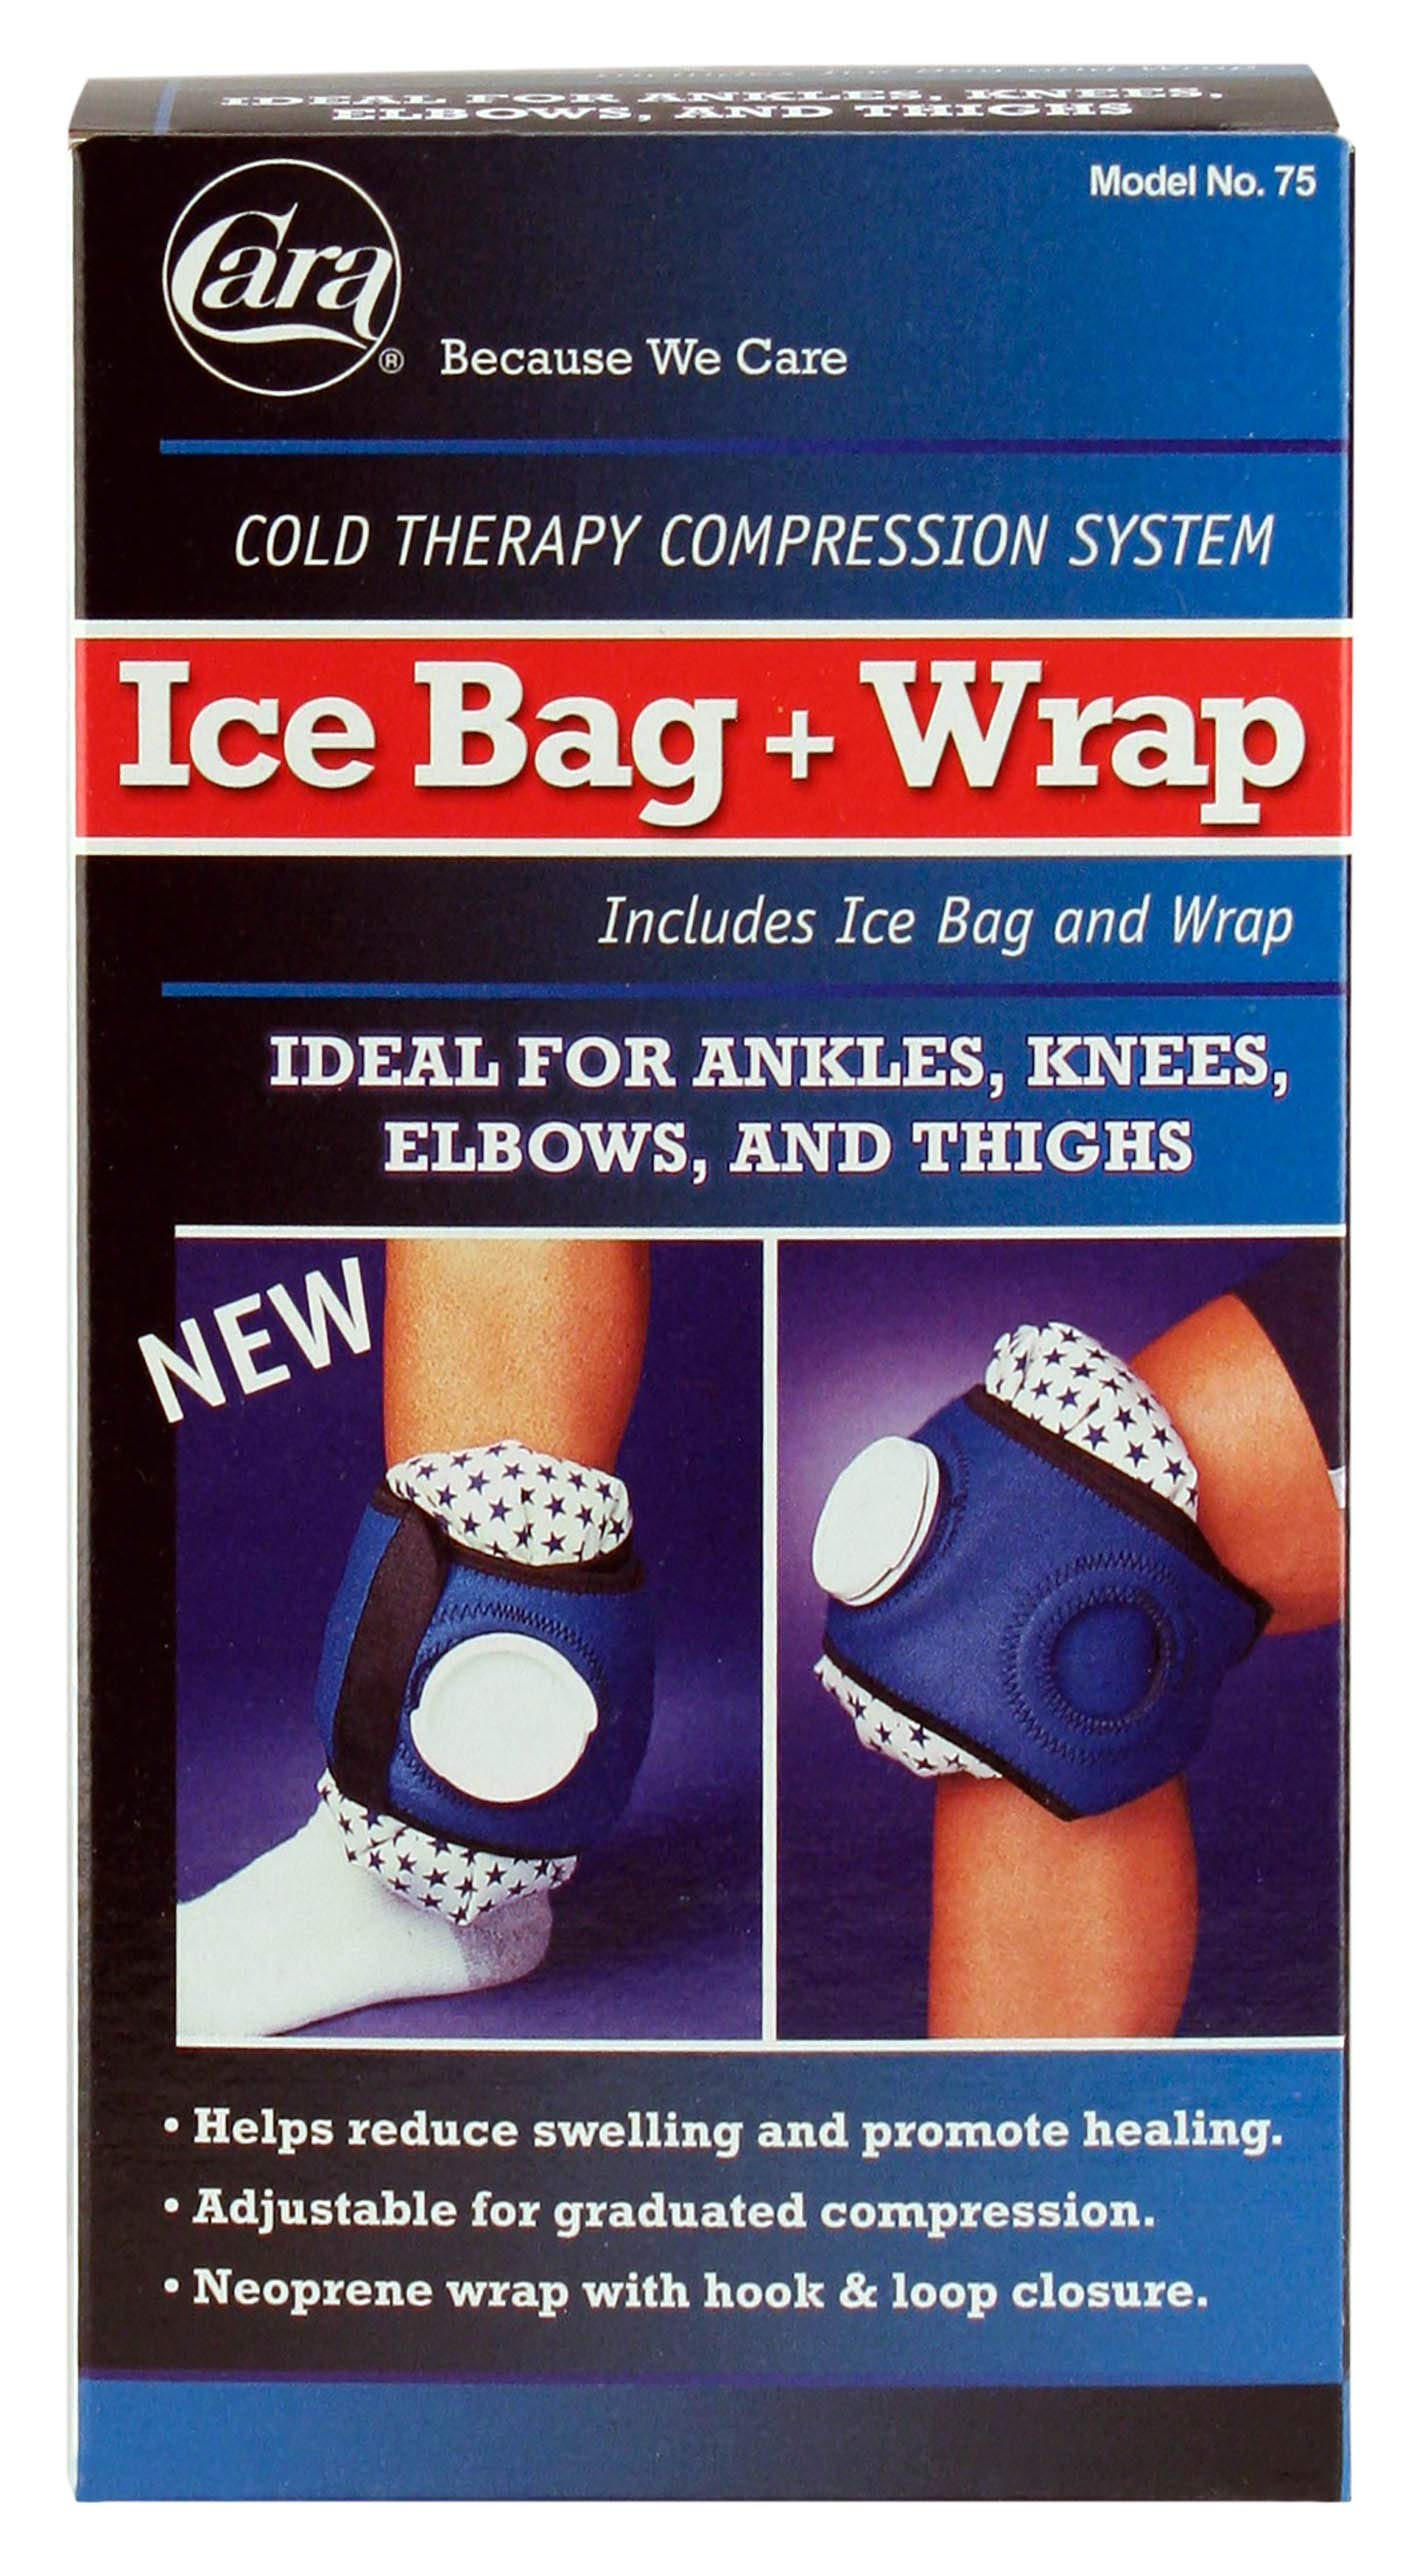 Cara Cold Therapy Ice Bag and Wrap